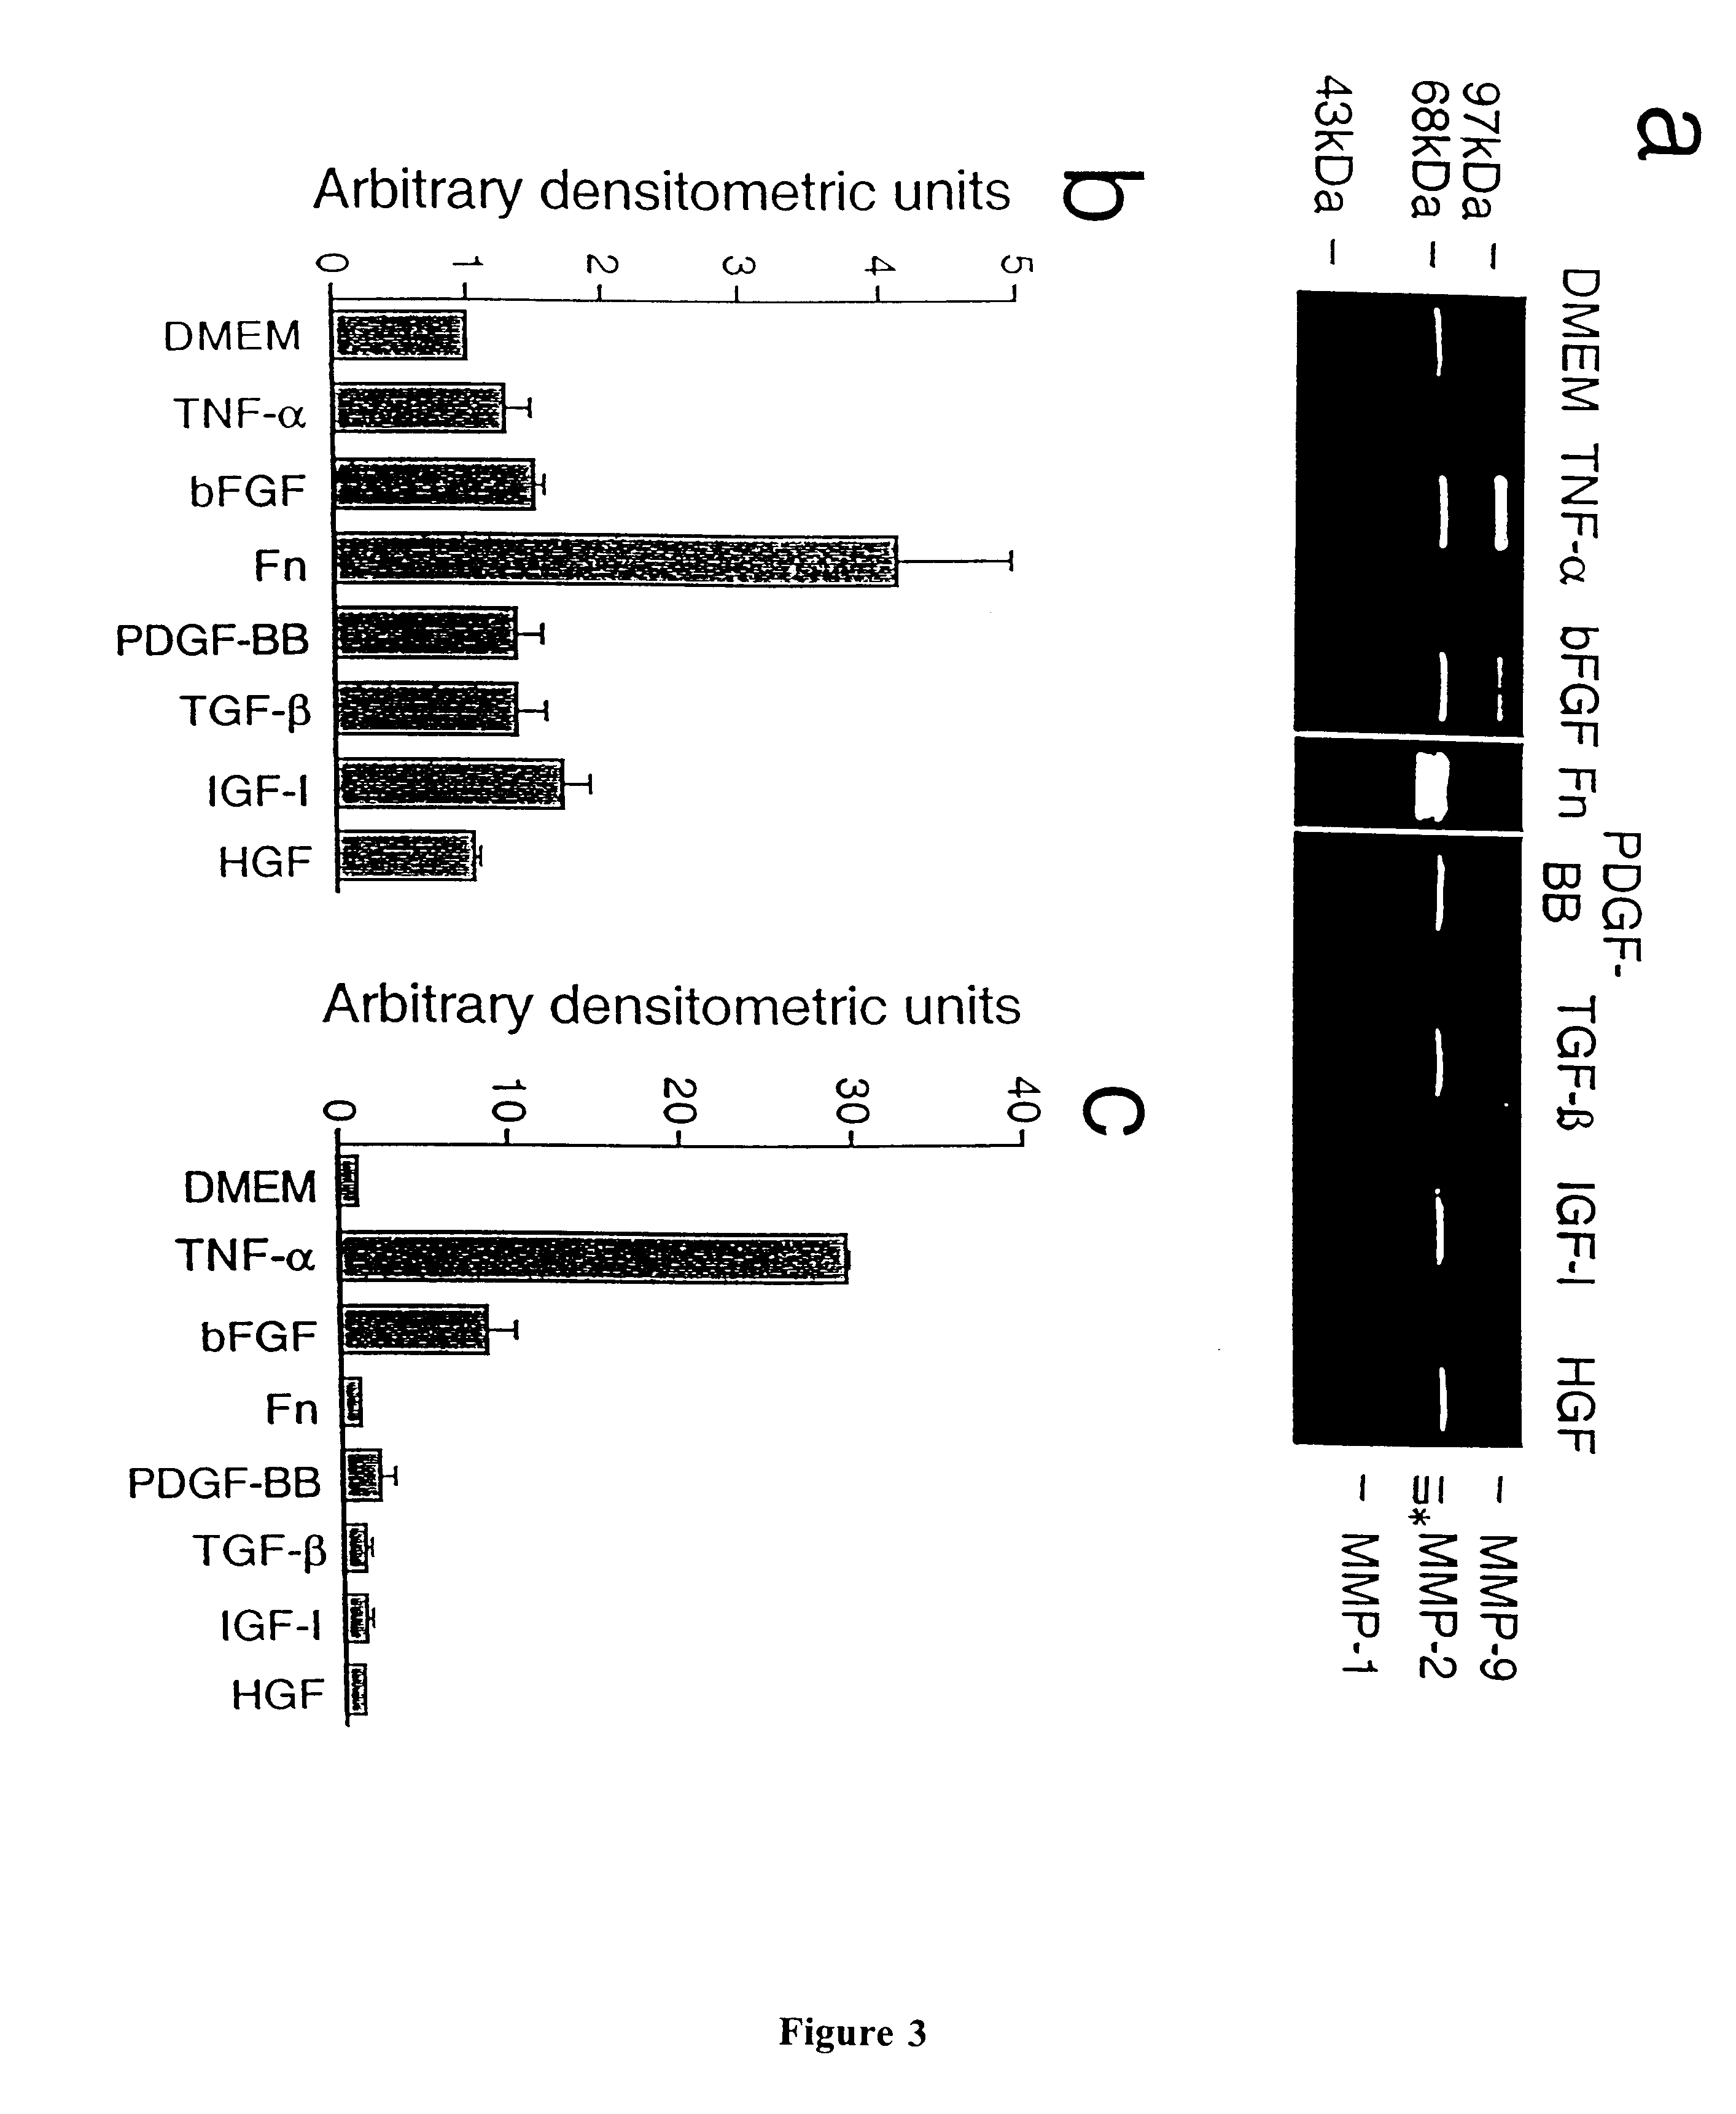 Method for enhancing myoblast migration and invasion in the context of gene therapy